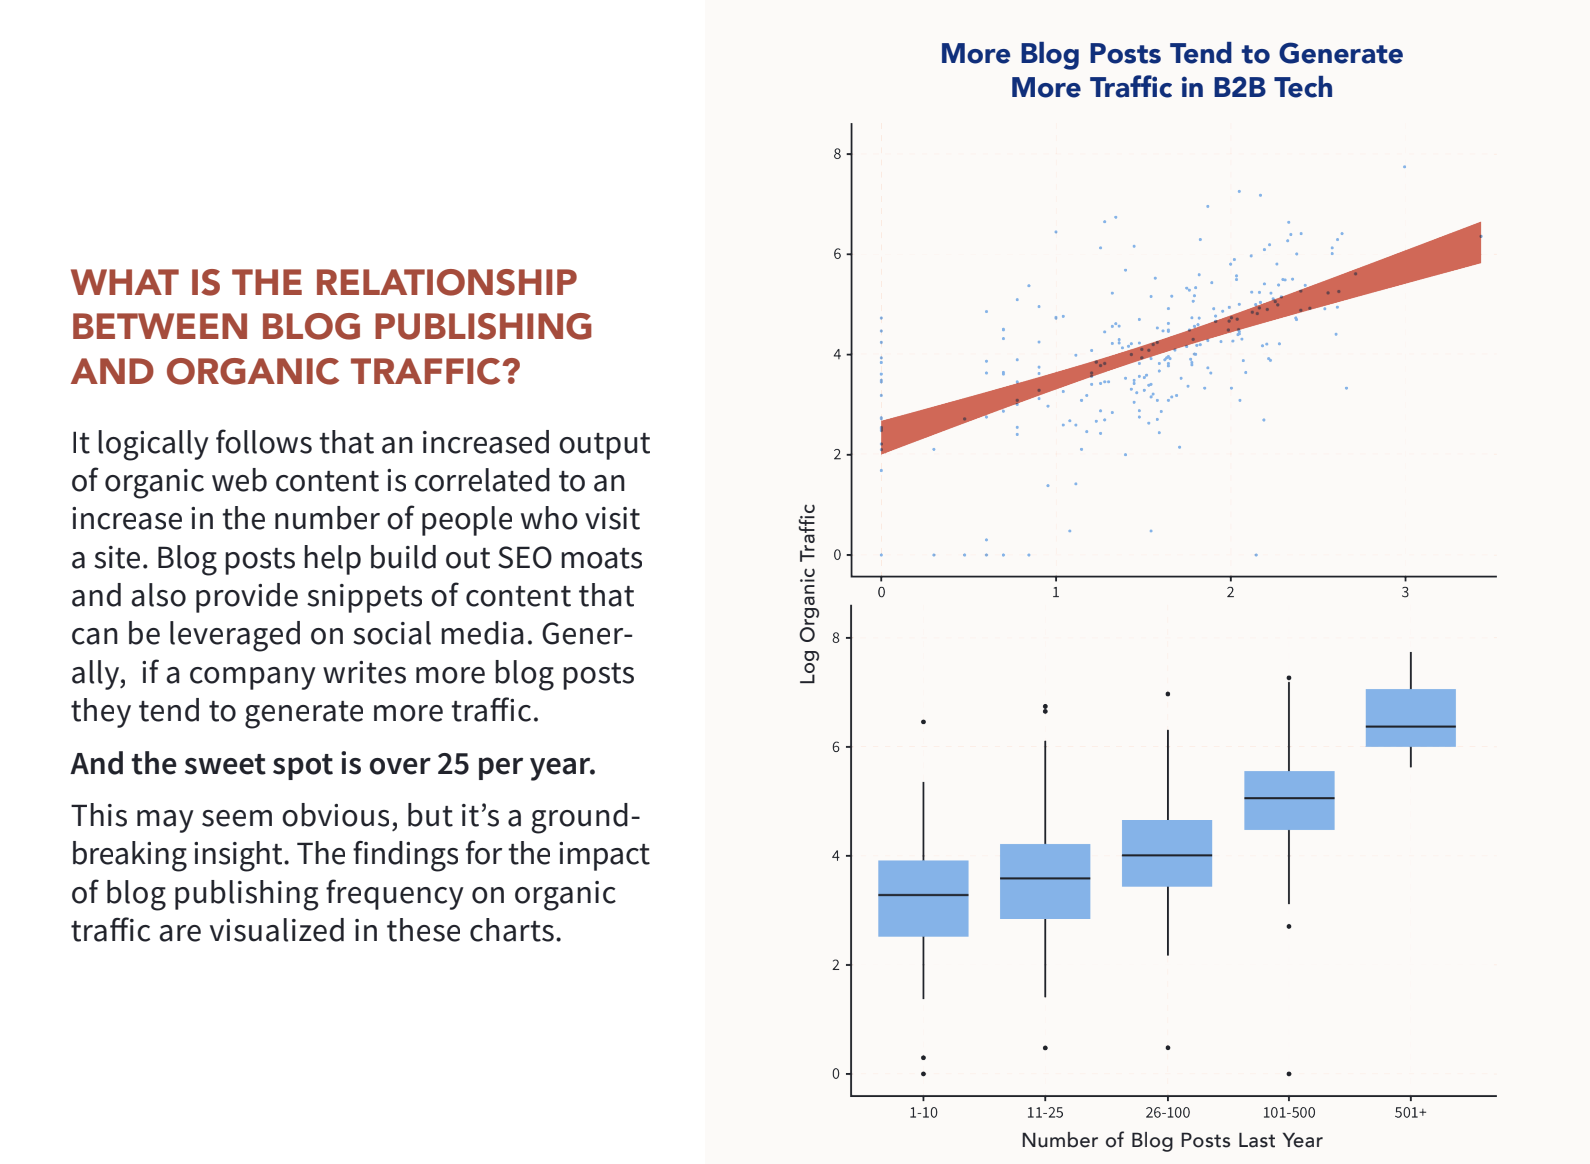 Graphs showing that more blog posts generate more traffic